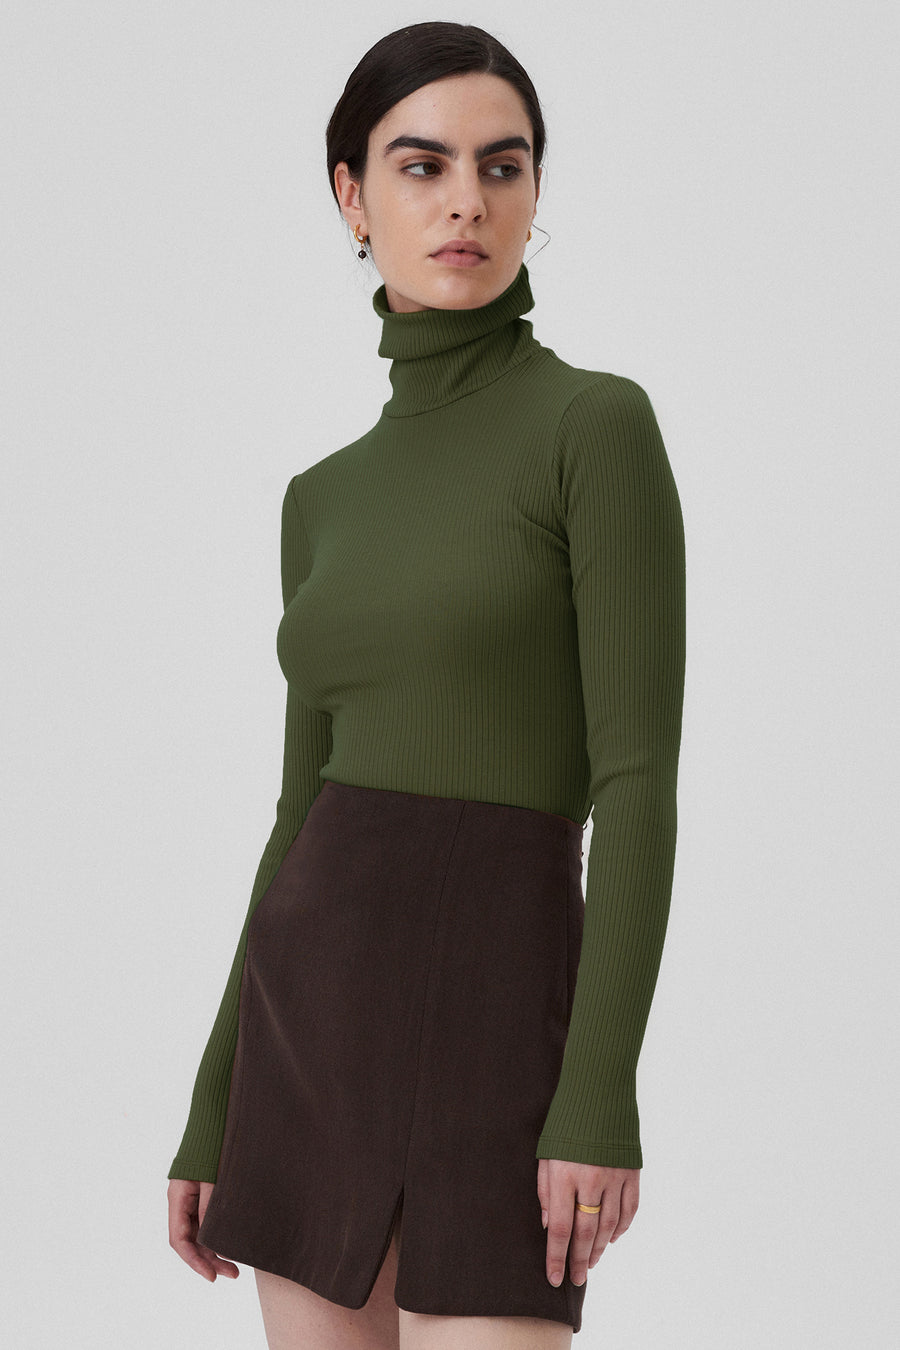 Turtleneck in organic cotton / 15 / 02 / olive garden *tencel-skirt-07-02-dark-chocolate* ?The model is 172cm tall and wears size XS? |